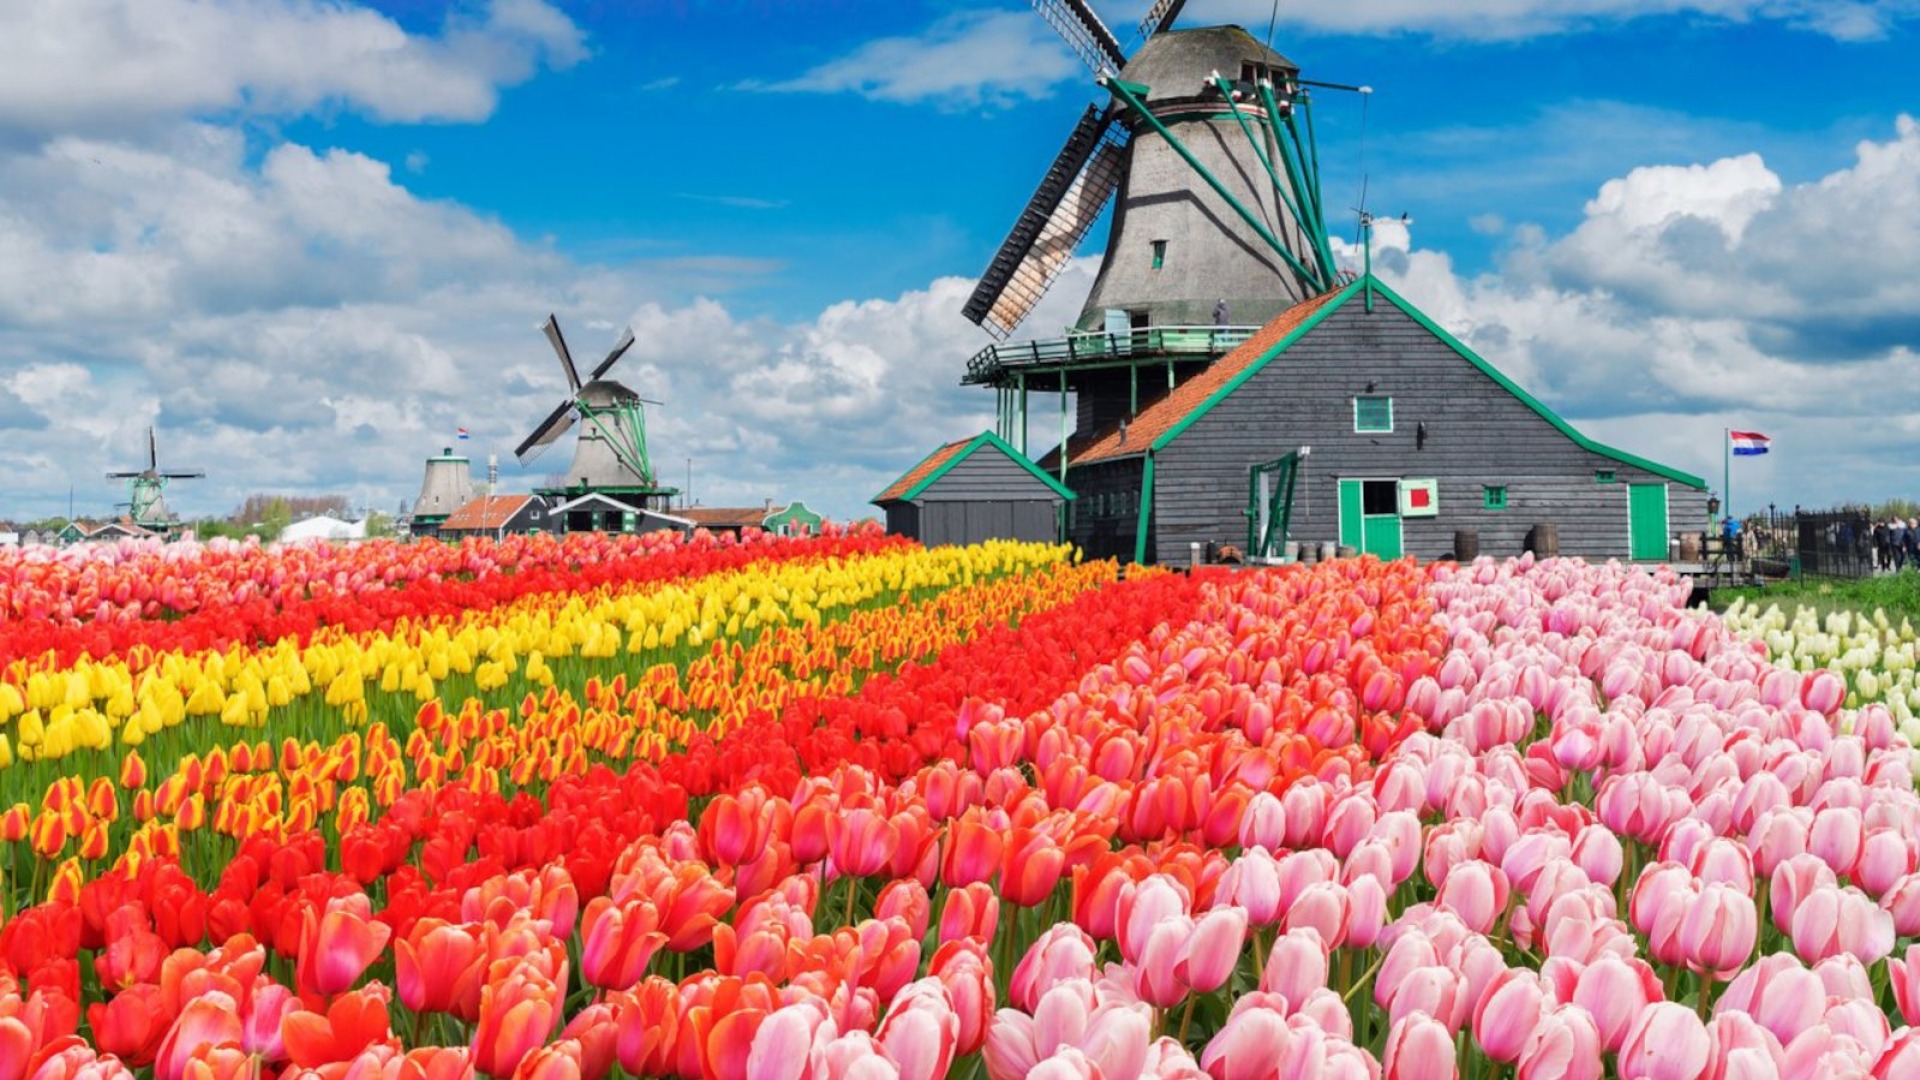 General 1920x1080 tulips farm flowers colorful blue sky Netherlands windmill